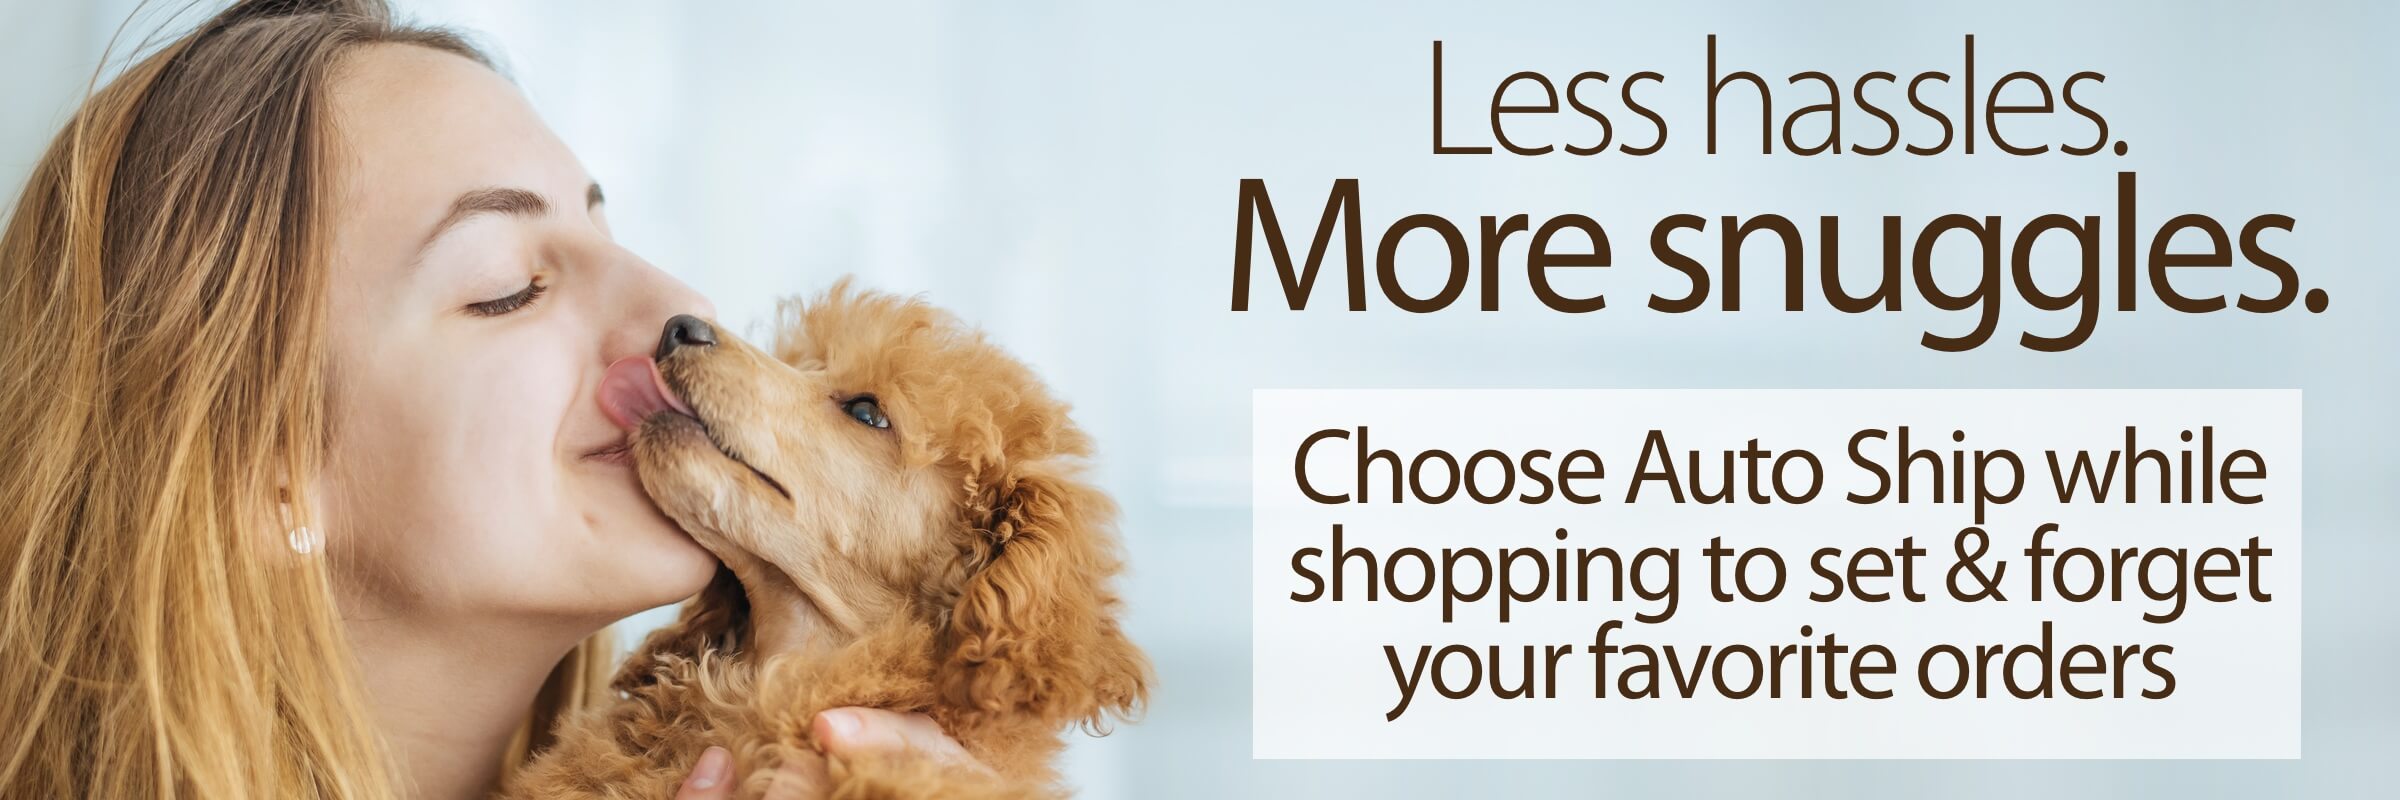 Smiling woman receiving kisses from light brown toy poodle Less hassles More snuggles Choose Auto Ship while shopping to set and forget your favorite orders